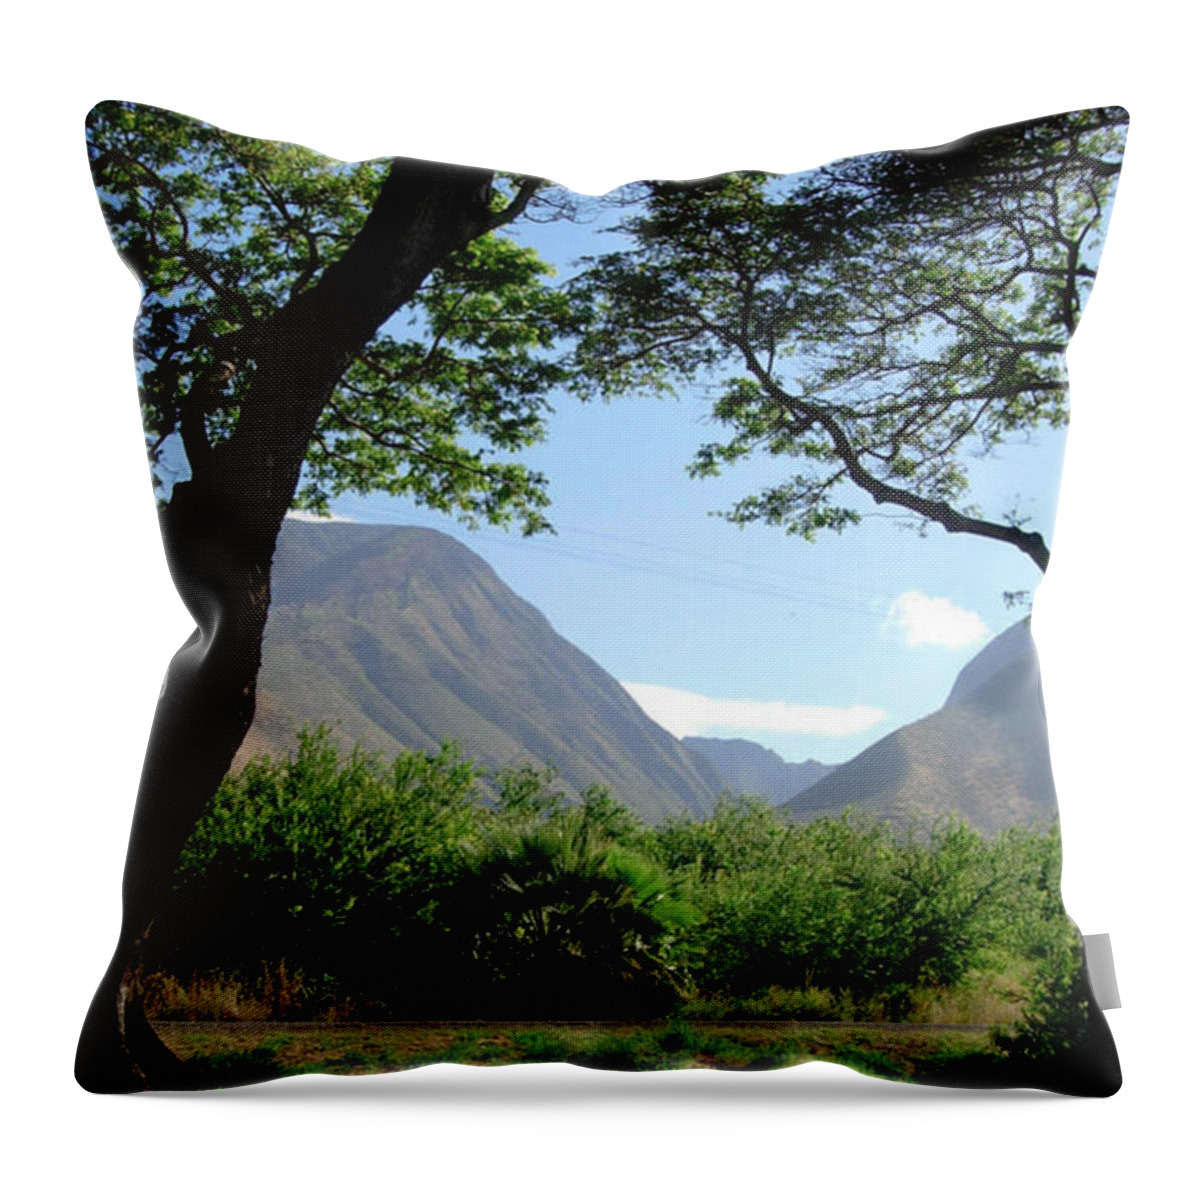 Hawaii Throw Pillow featuring the photograph Valley View by Ken Arcia